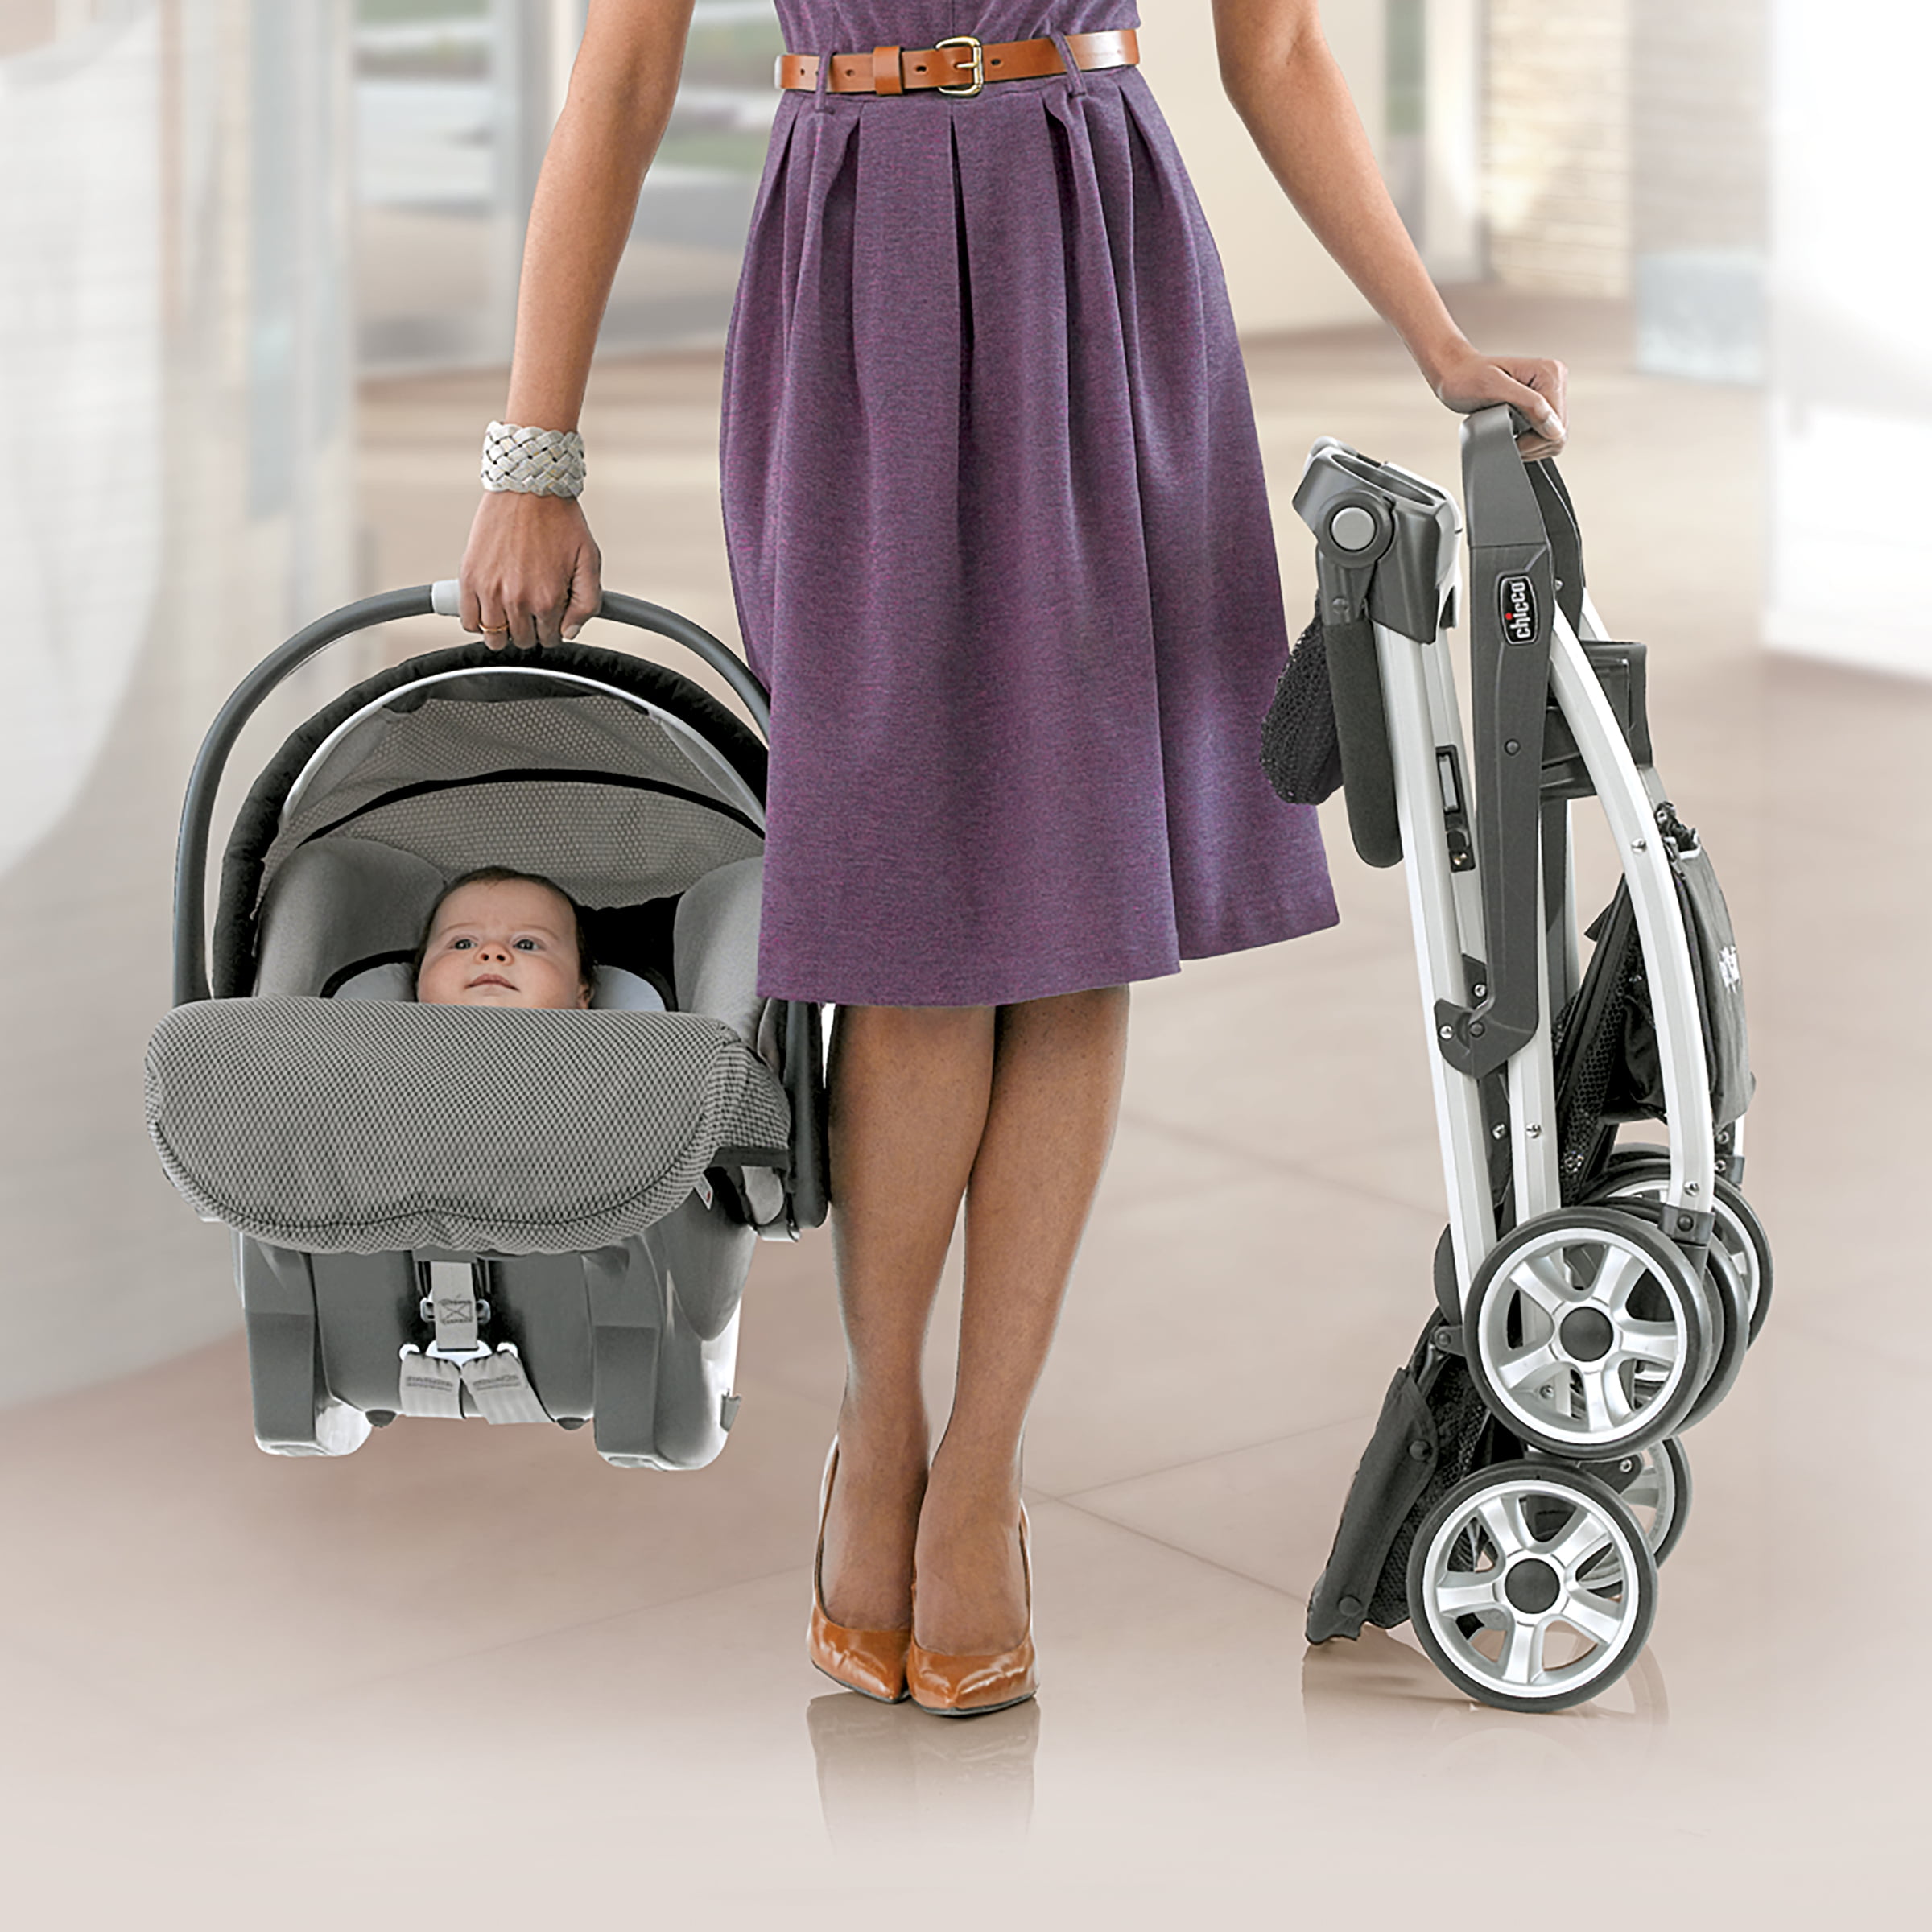 chicco keyfit caddy compatible with graco